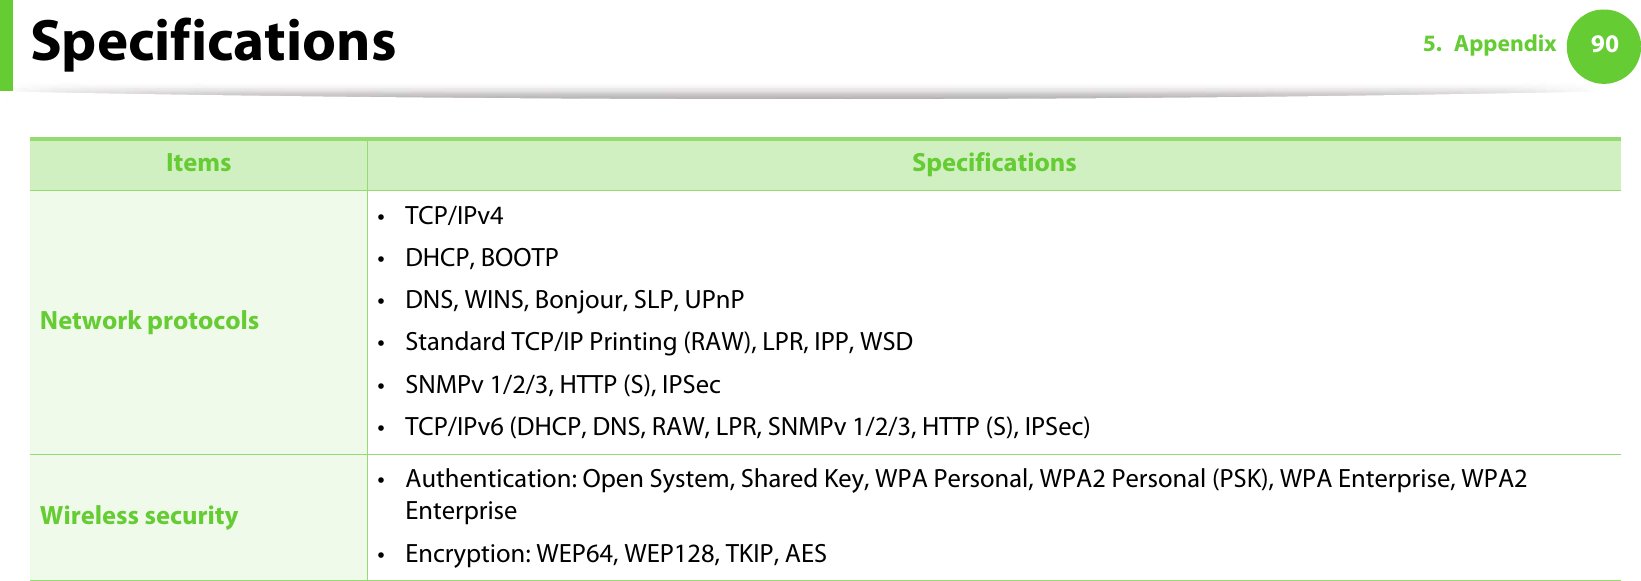 Specifications 905. Appendix Network protocols•TCP/IPv4• DHCP, BOOTP• DNS, WINS, Bonjour, SLP, UPnP• Standard TCP/IP Printing (RAW), LPR, IPP, WSD• SNMPv 1/2/3, HTTP (S), IPSec• TCP/IPv6 (DHCP, DNS, RAW, LPR, SNMPv 1/2/3, HTTP (S), IPSec)Wireless security • Authentication: Open System, Shared Key, WPA Personal, WPA2 Personal (PSK), WPA Enterprise, WPA2 Enterprise• Encryption: WEP64, WEP128, TKIP, AESItems Specifications